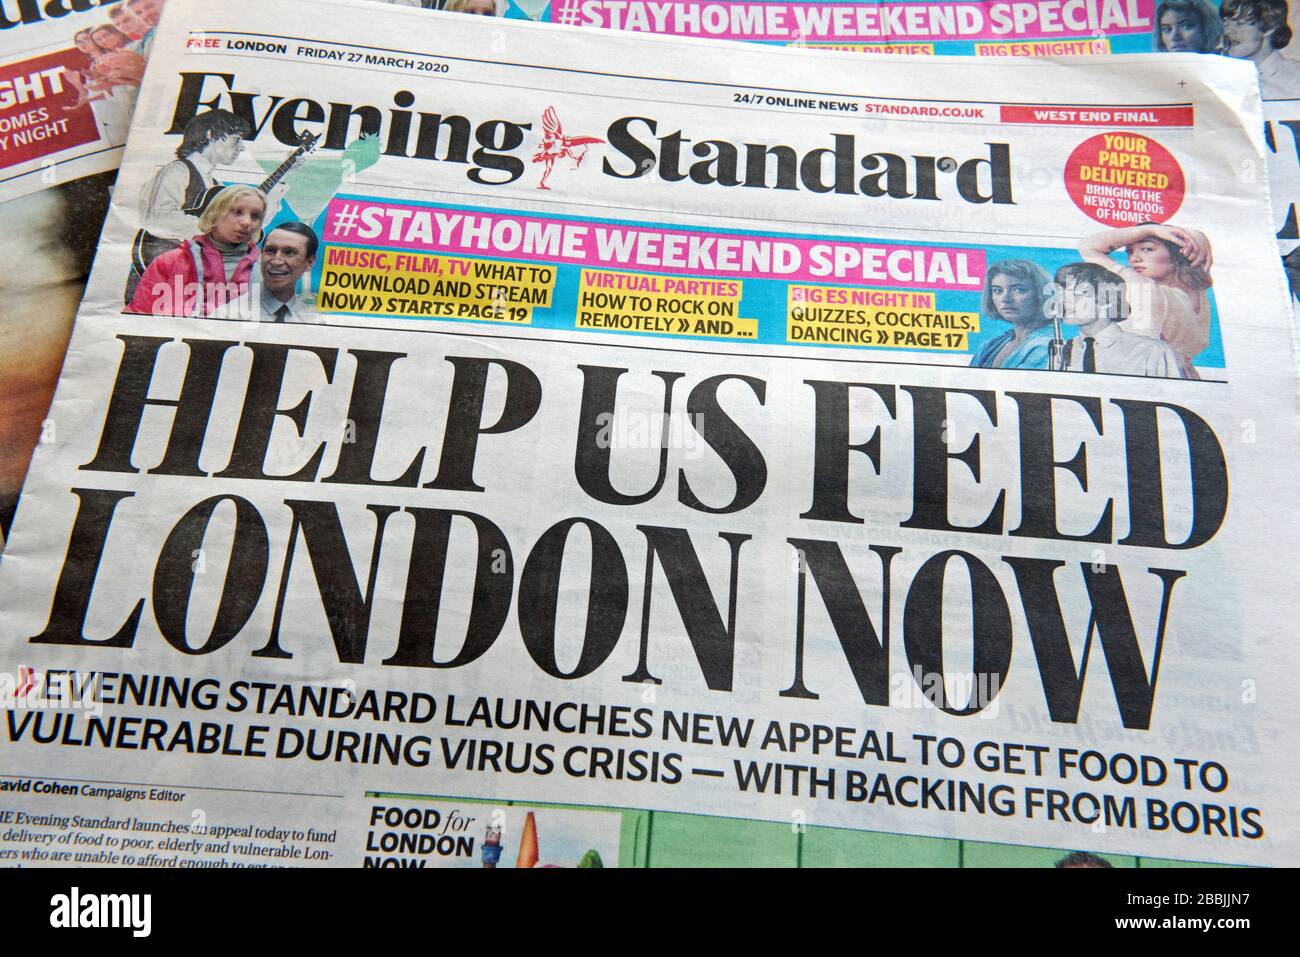 Evening Standard newspaper headline about getting food to vulnerable during Coronavirus crisis. Help us Feed London Now. Editorial use only Stock Photo